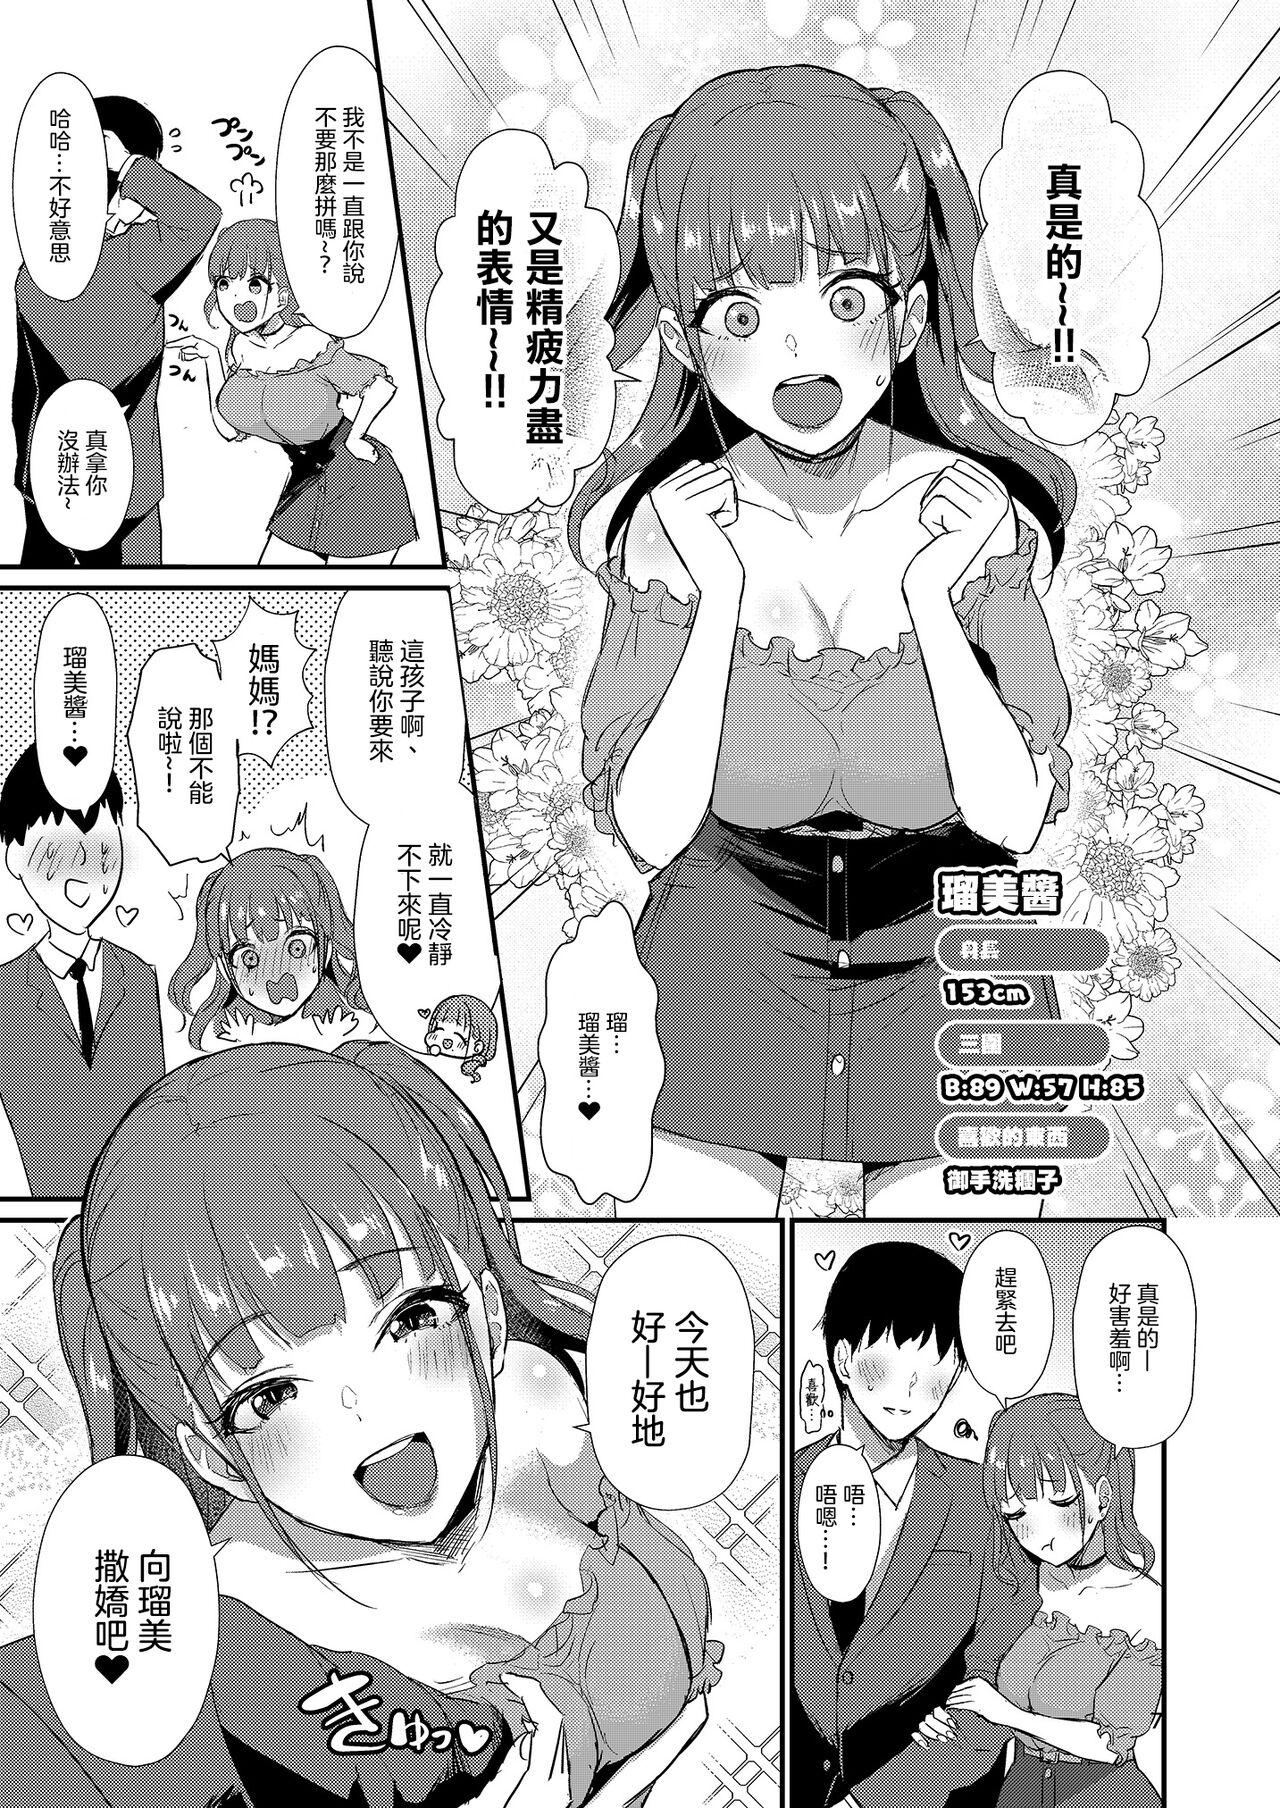 Piercings Homehome Home e Youkoso! - Welcome to Home Home Home! | 歡迎來到誇誇屋！ Sister - Page 8